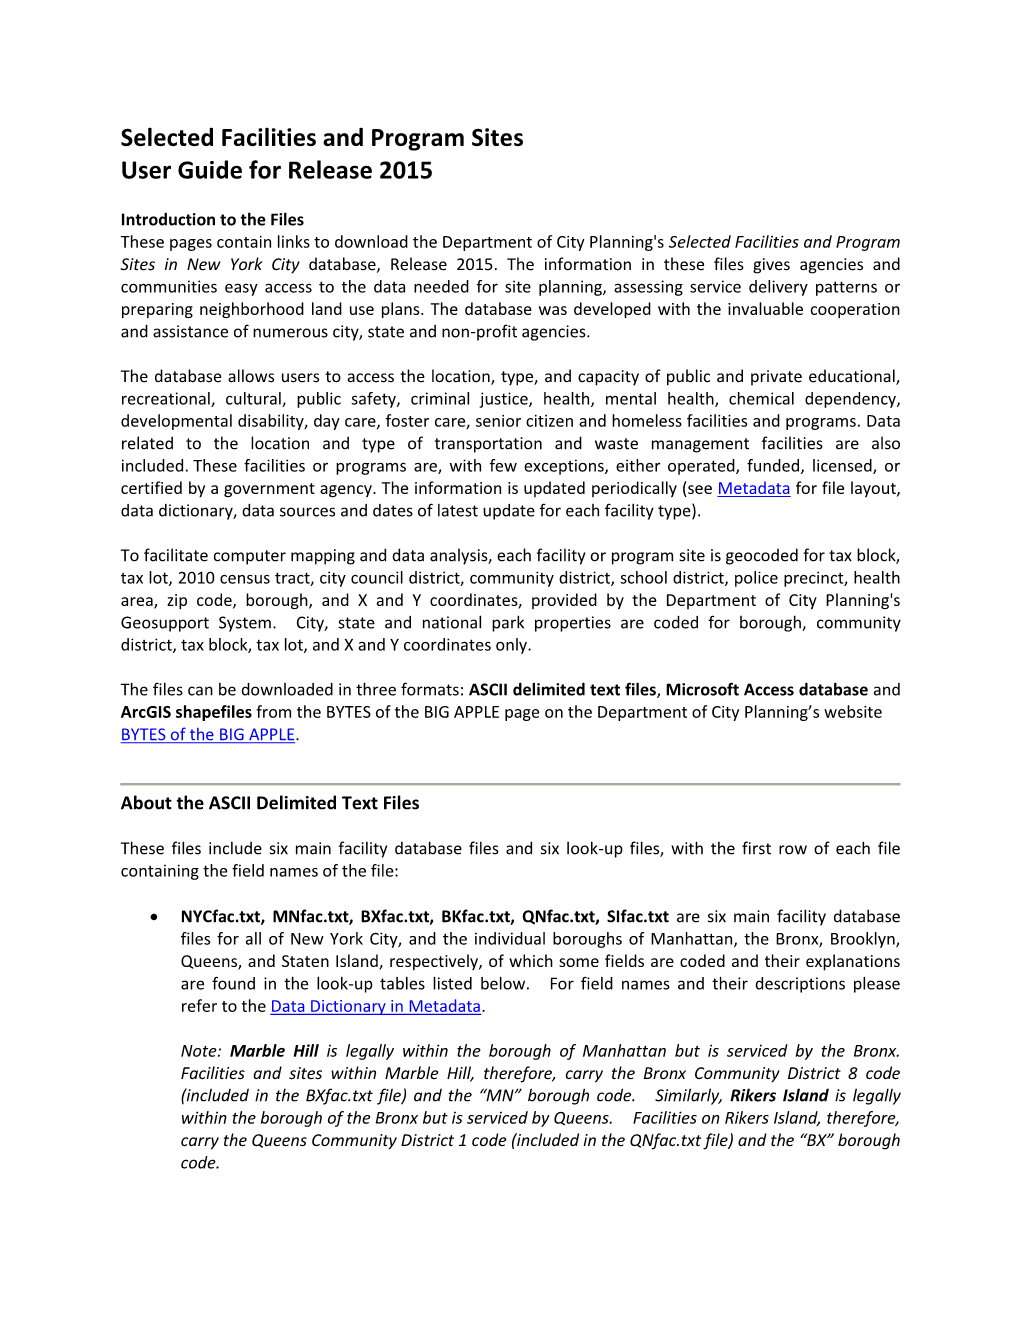 Selected Facilities and Program Sites User Guide for Release 2015